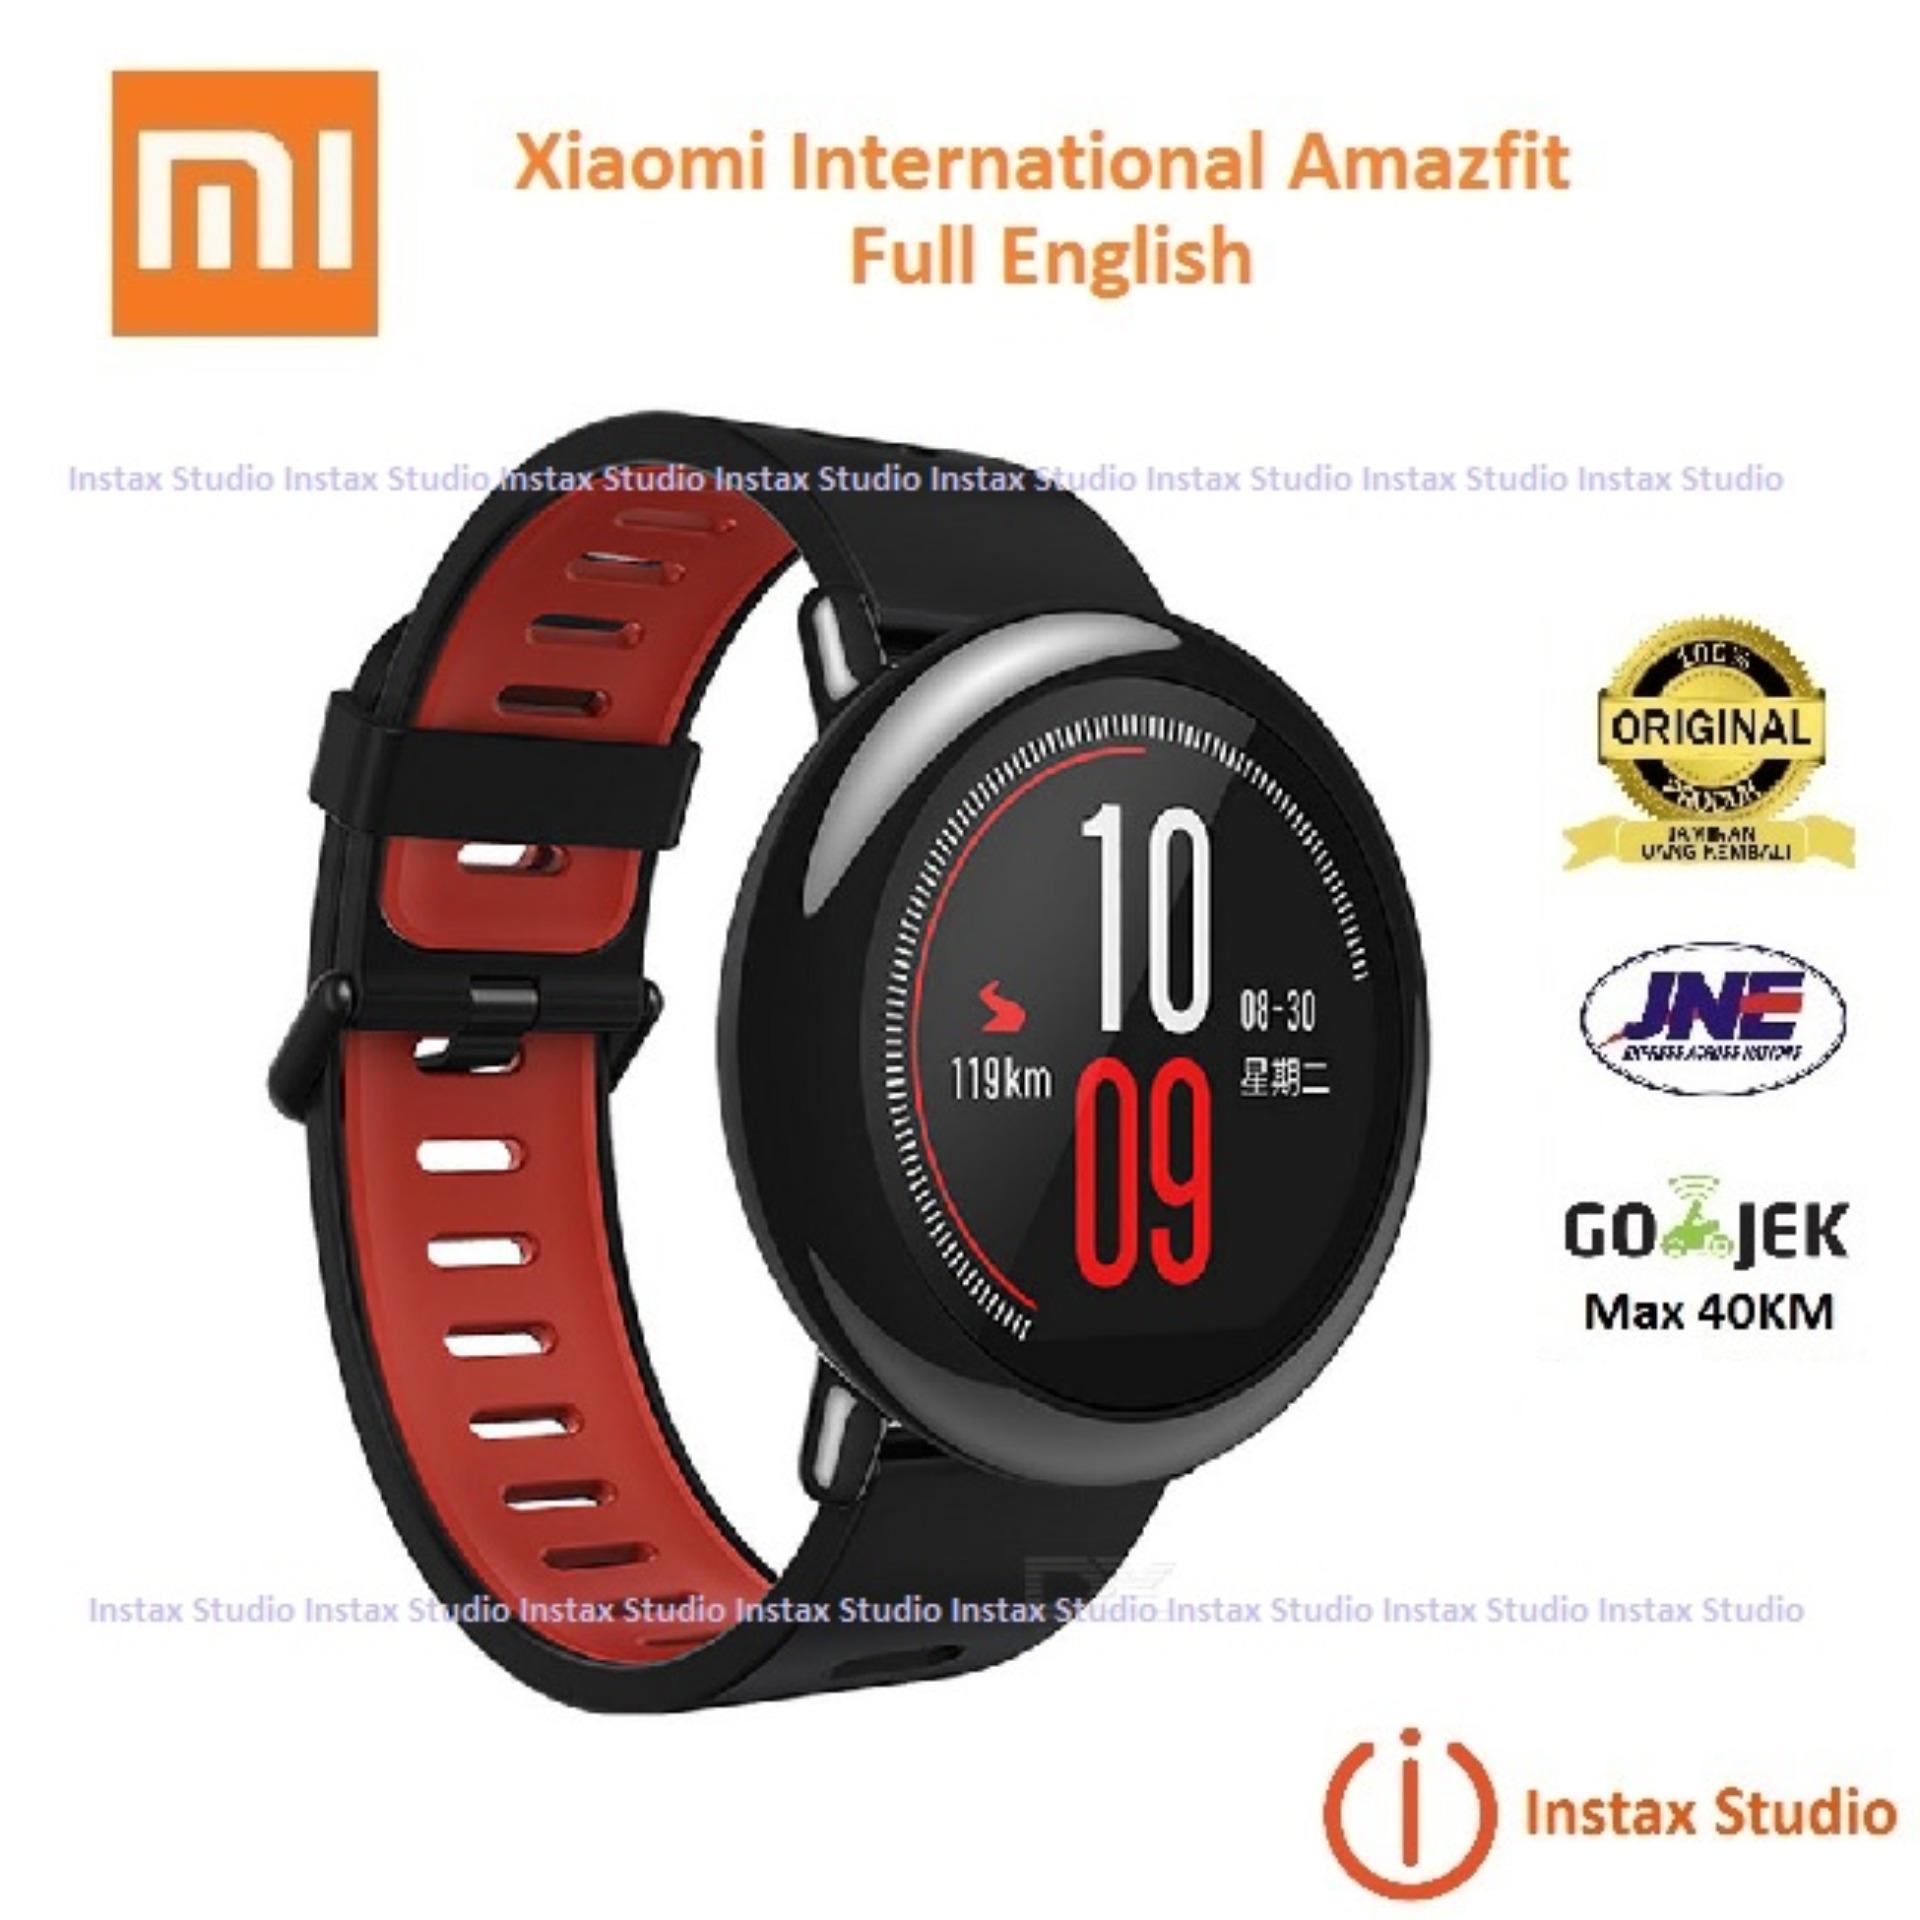 Xiaomi Amazfit Smartwatch International Version with GPS and Heart Rate Sensor - 100% English Version - Black